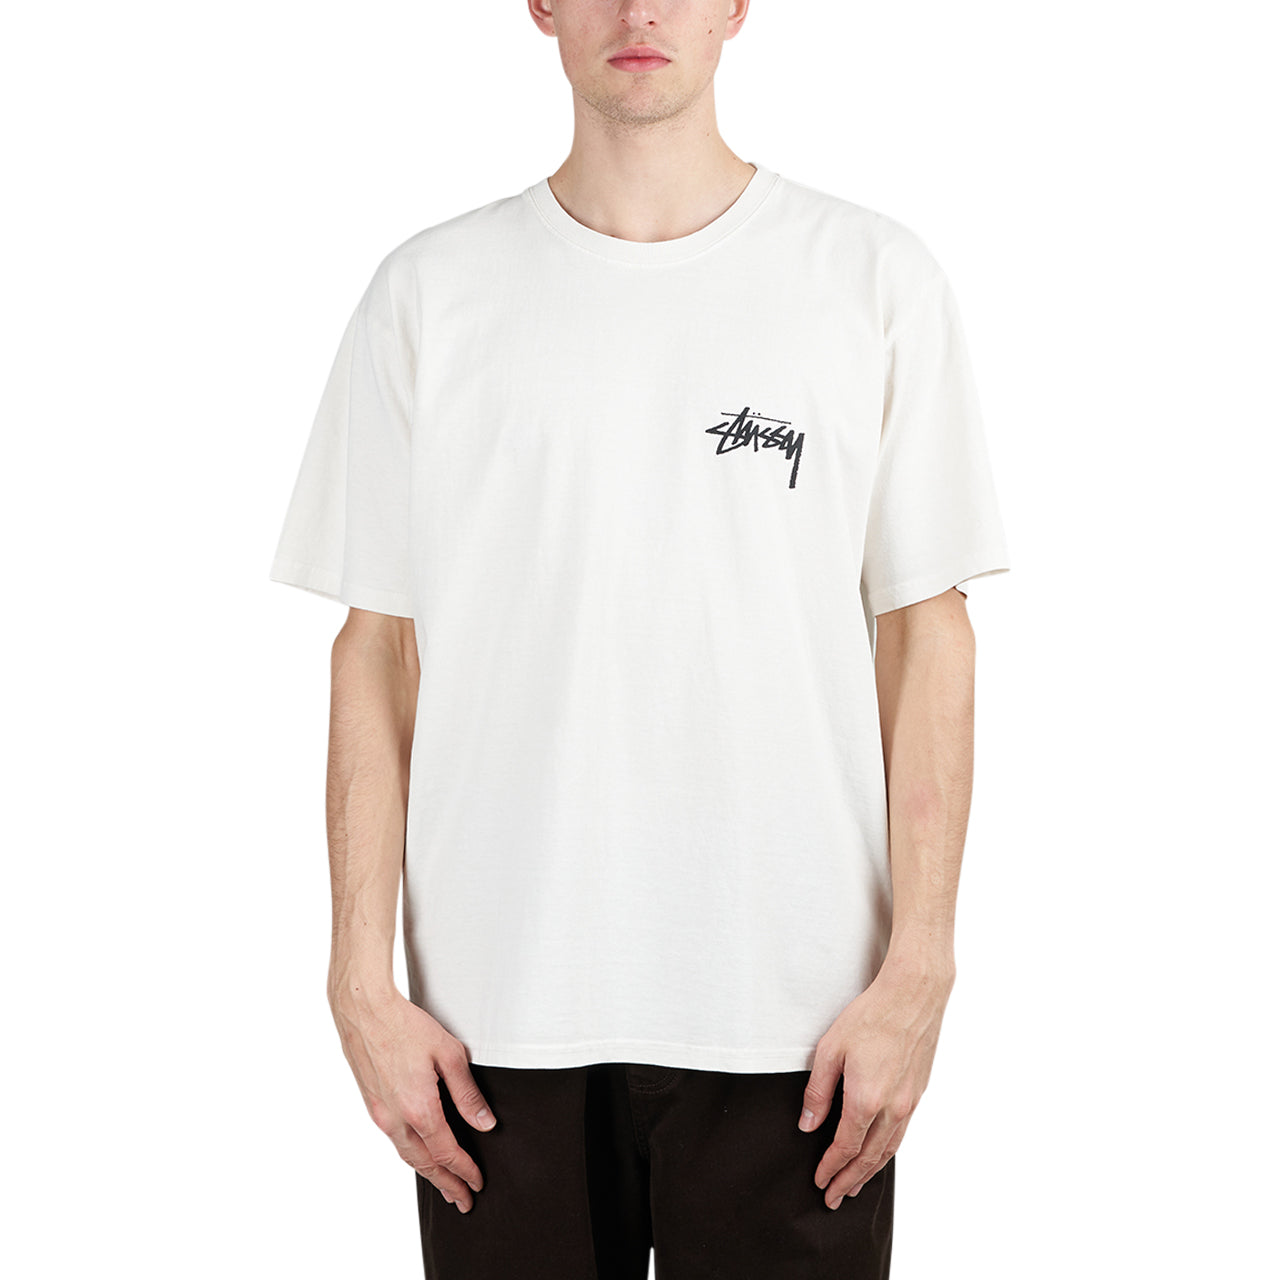 Stüssy How We'Re Livin' Pigment Dyed Tee (White / Black)